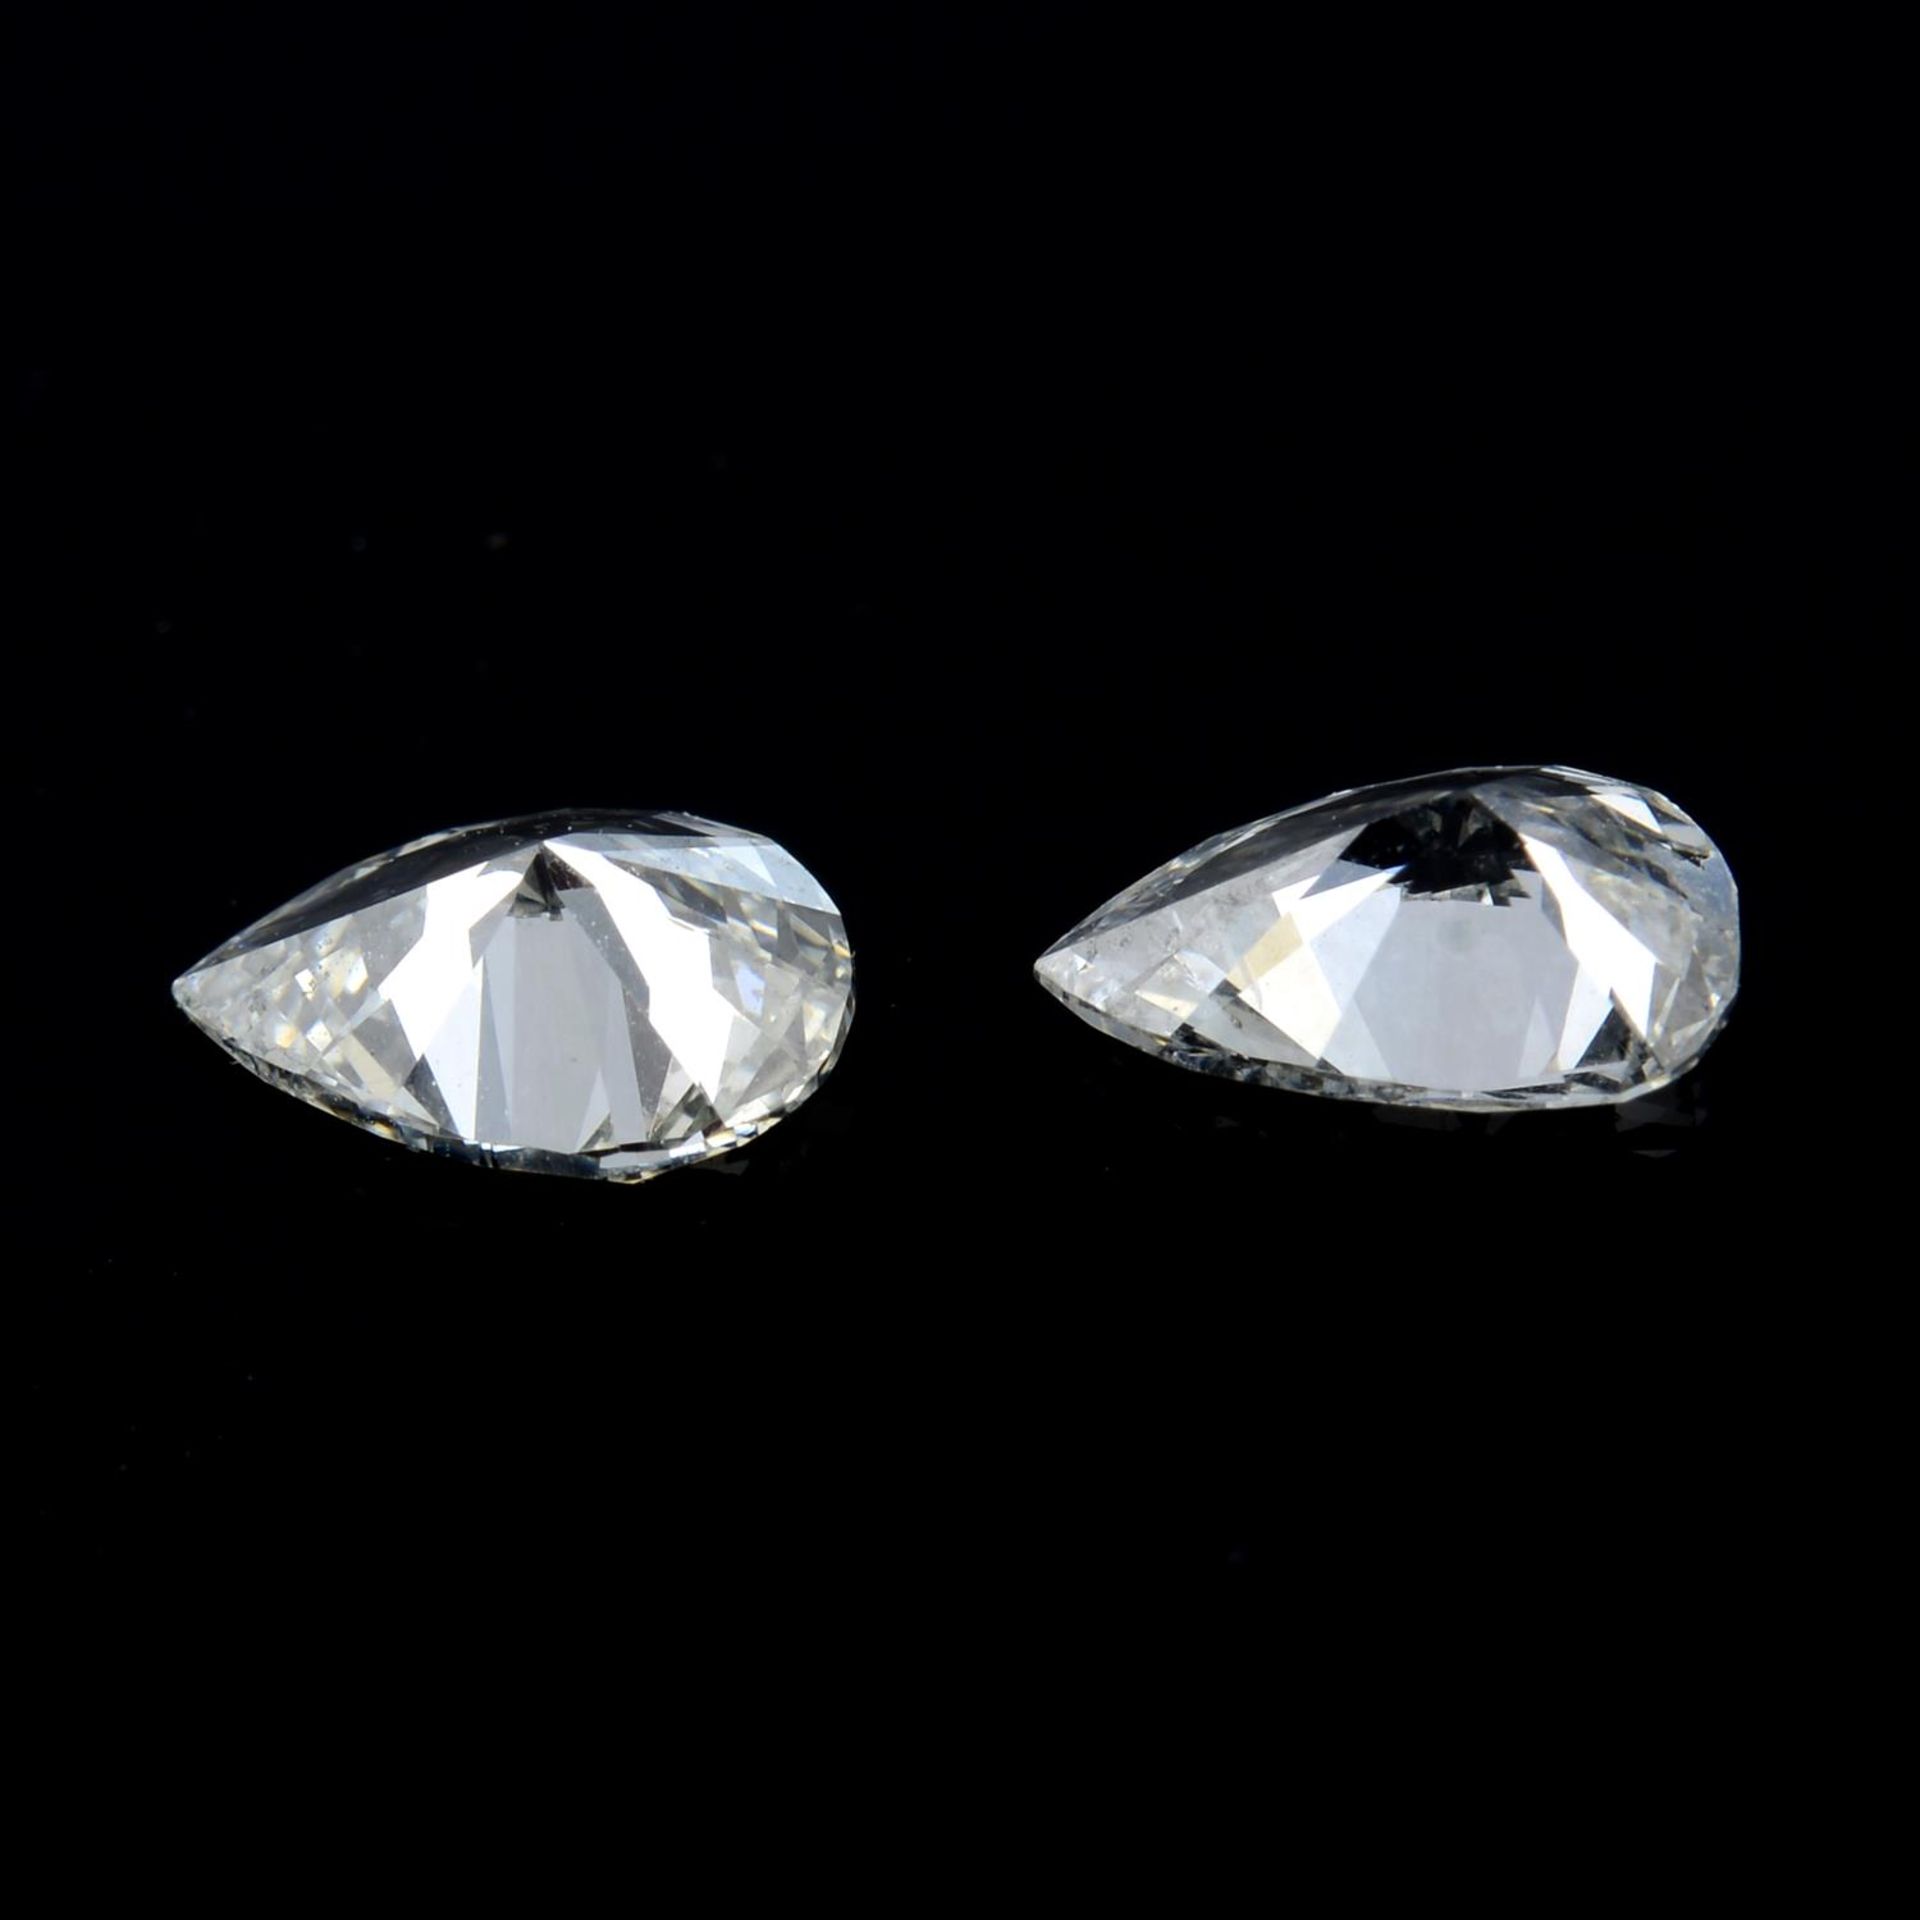 Two pear-shape diamonds, weight approximately 0.32ct and 0.33ct. - Image 2 of 2